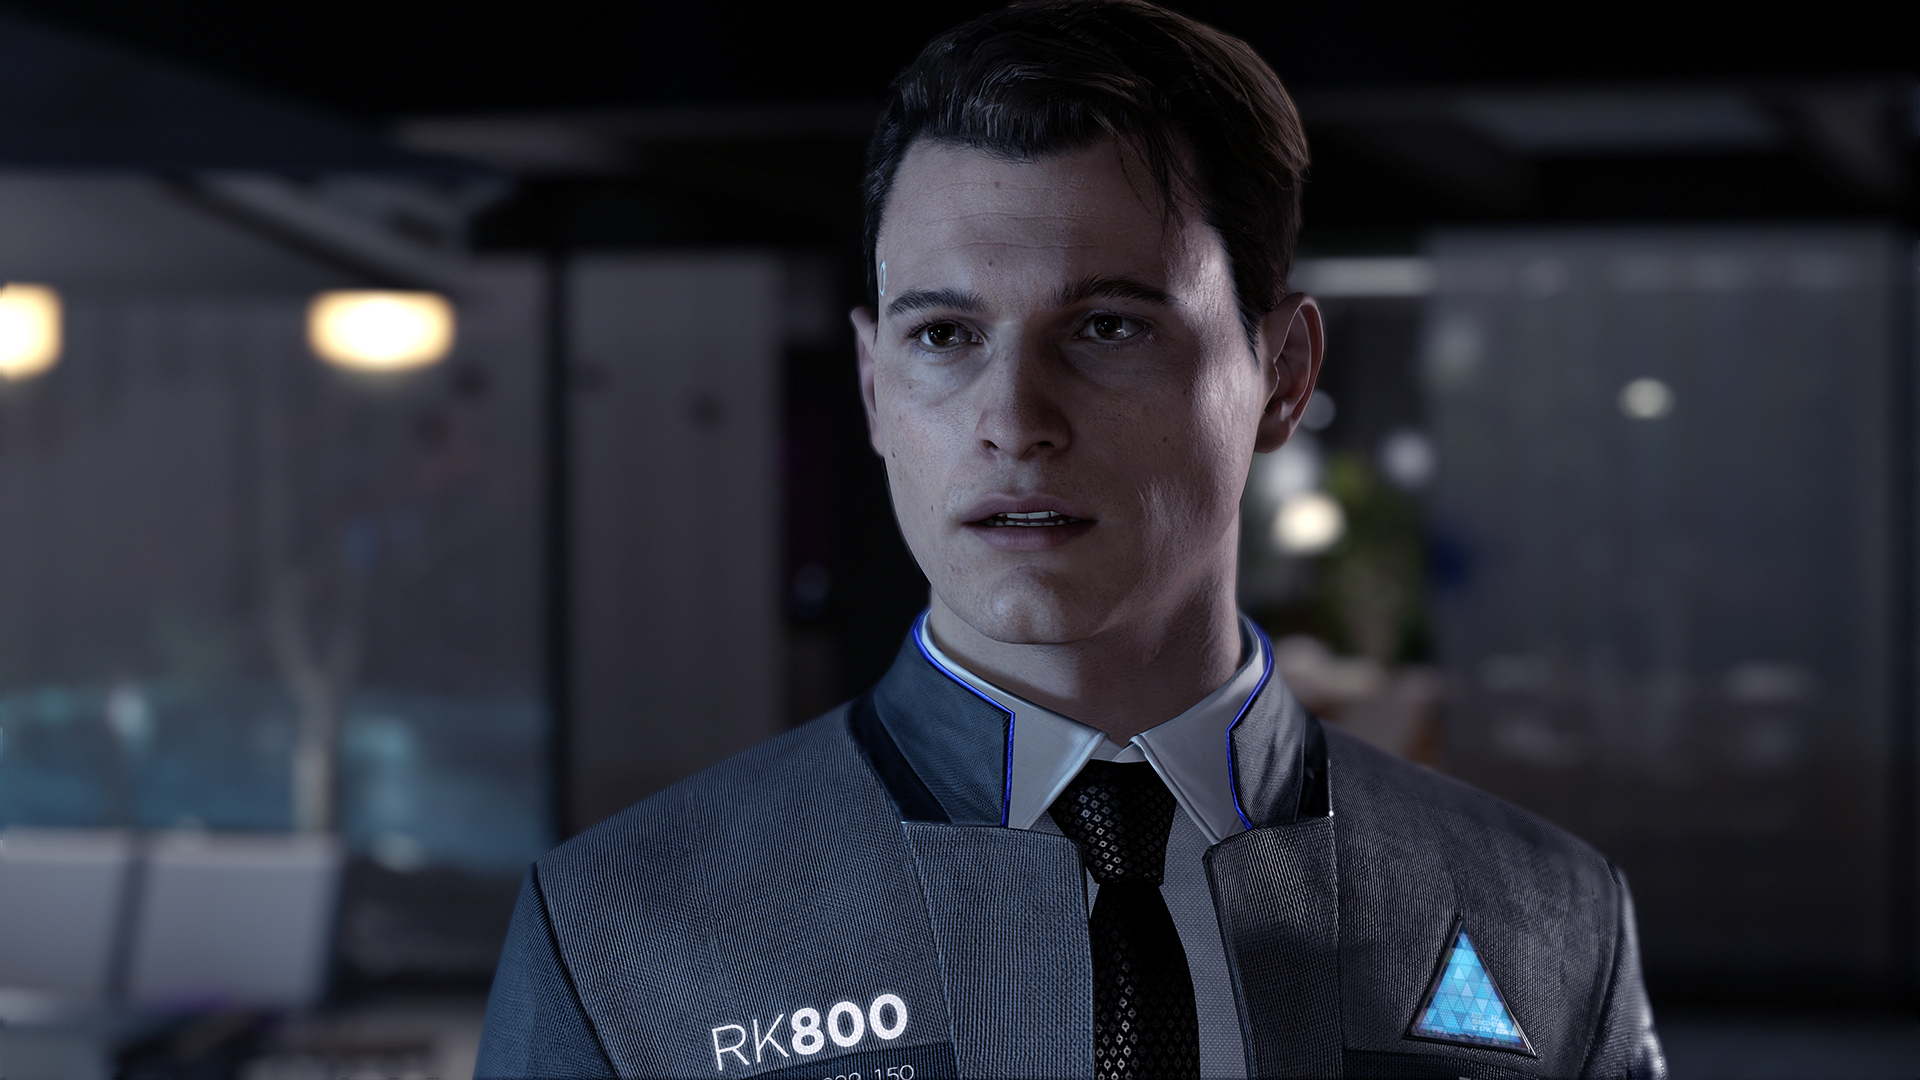 Does Connor From Detroit : Become Human Remind Anyone Else of Bob